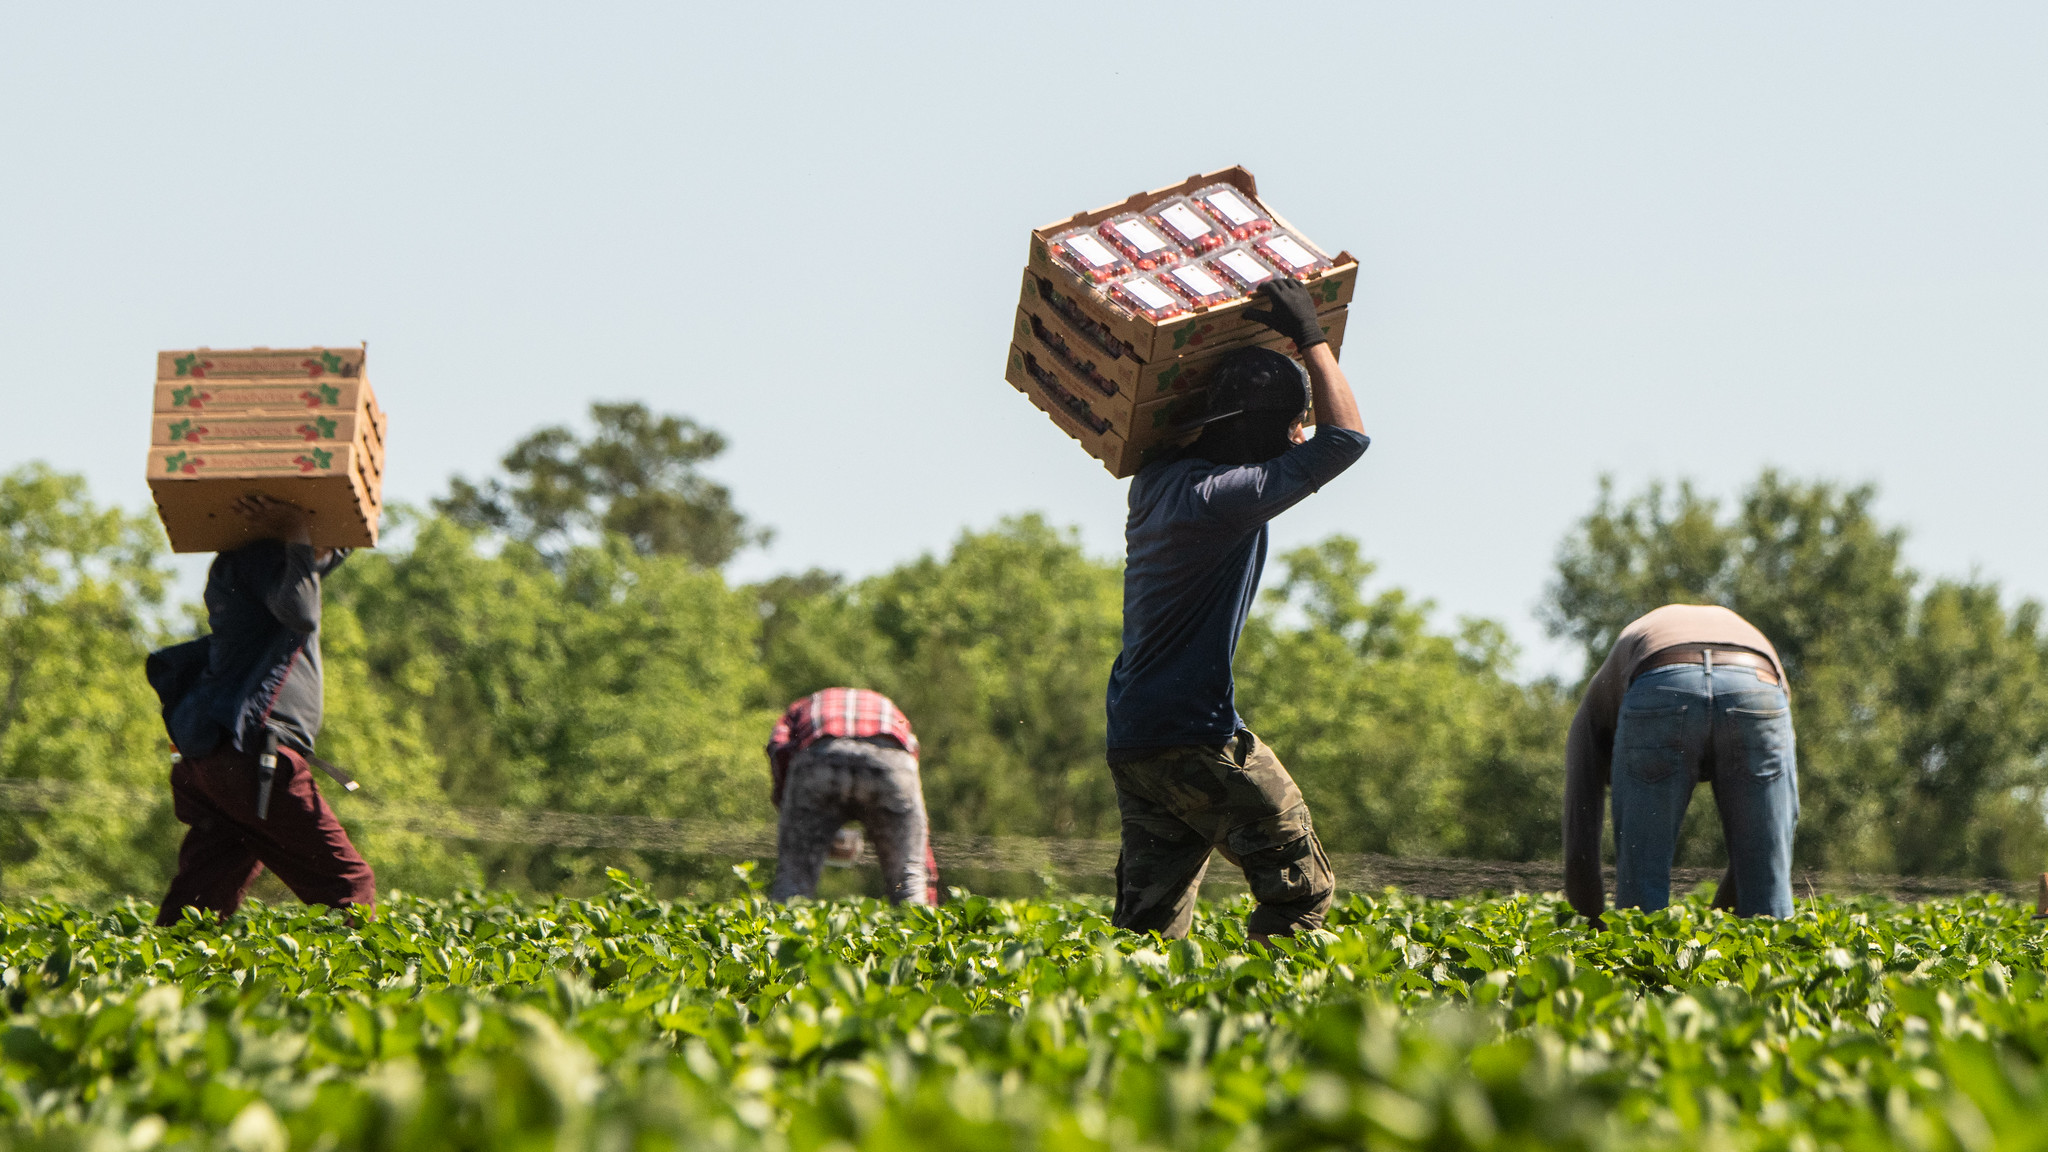 Farmworkers pick strawberries at Lewis Taylor Farms, which is co-owned by William L. Brim and Edward Walker who have large scale cotton, peanut, vegetable and greenhouse operations in Fort Valley, GA, on May 7, 2019. Credits to: US Department of Agriculture